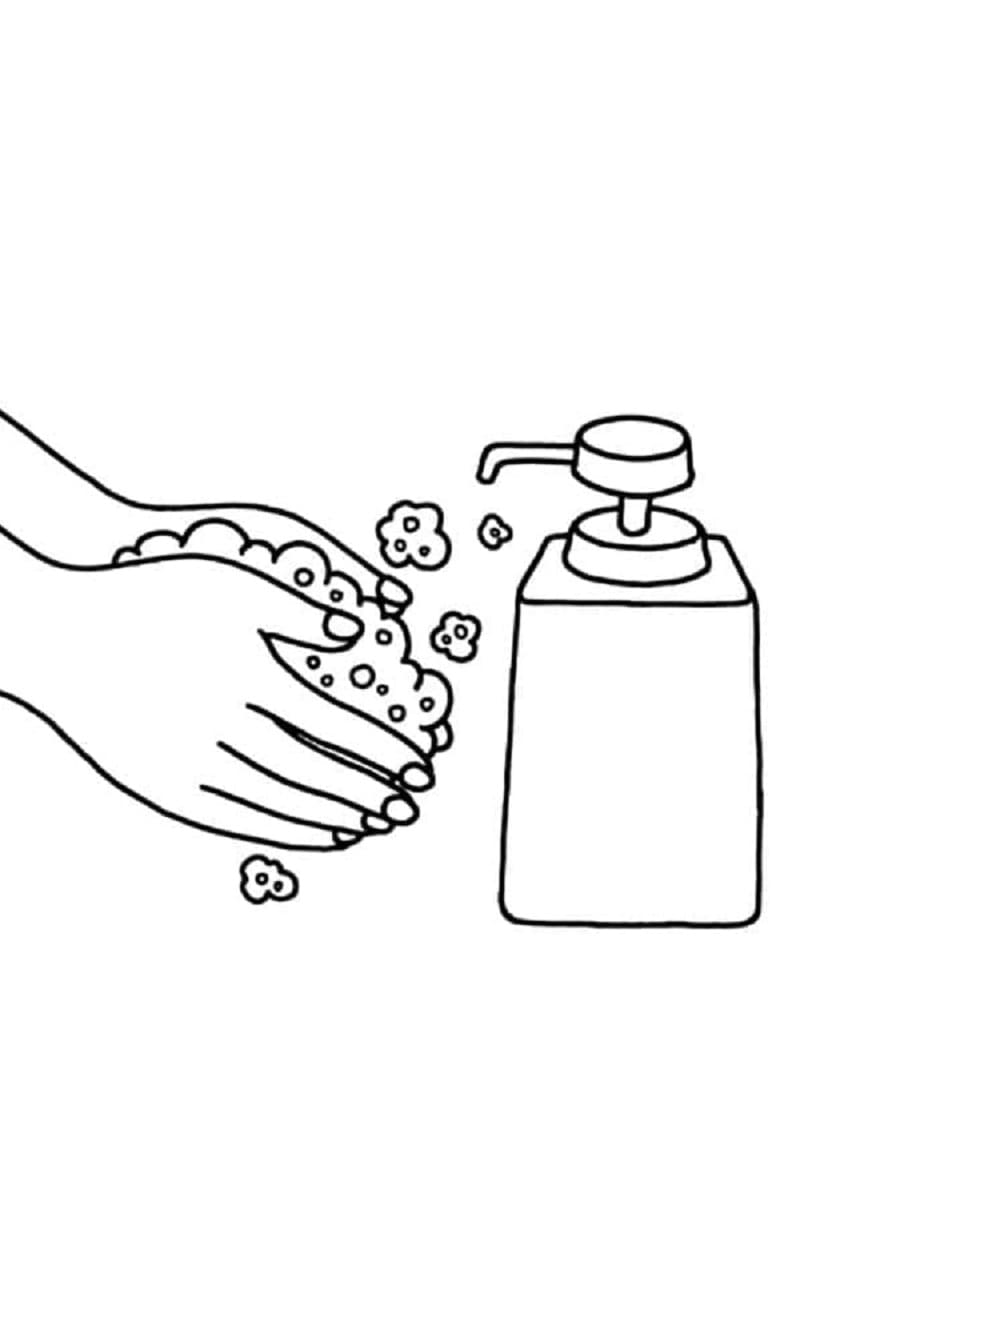 Printable Washing Hand With Soap Hygiene Coloring Page